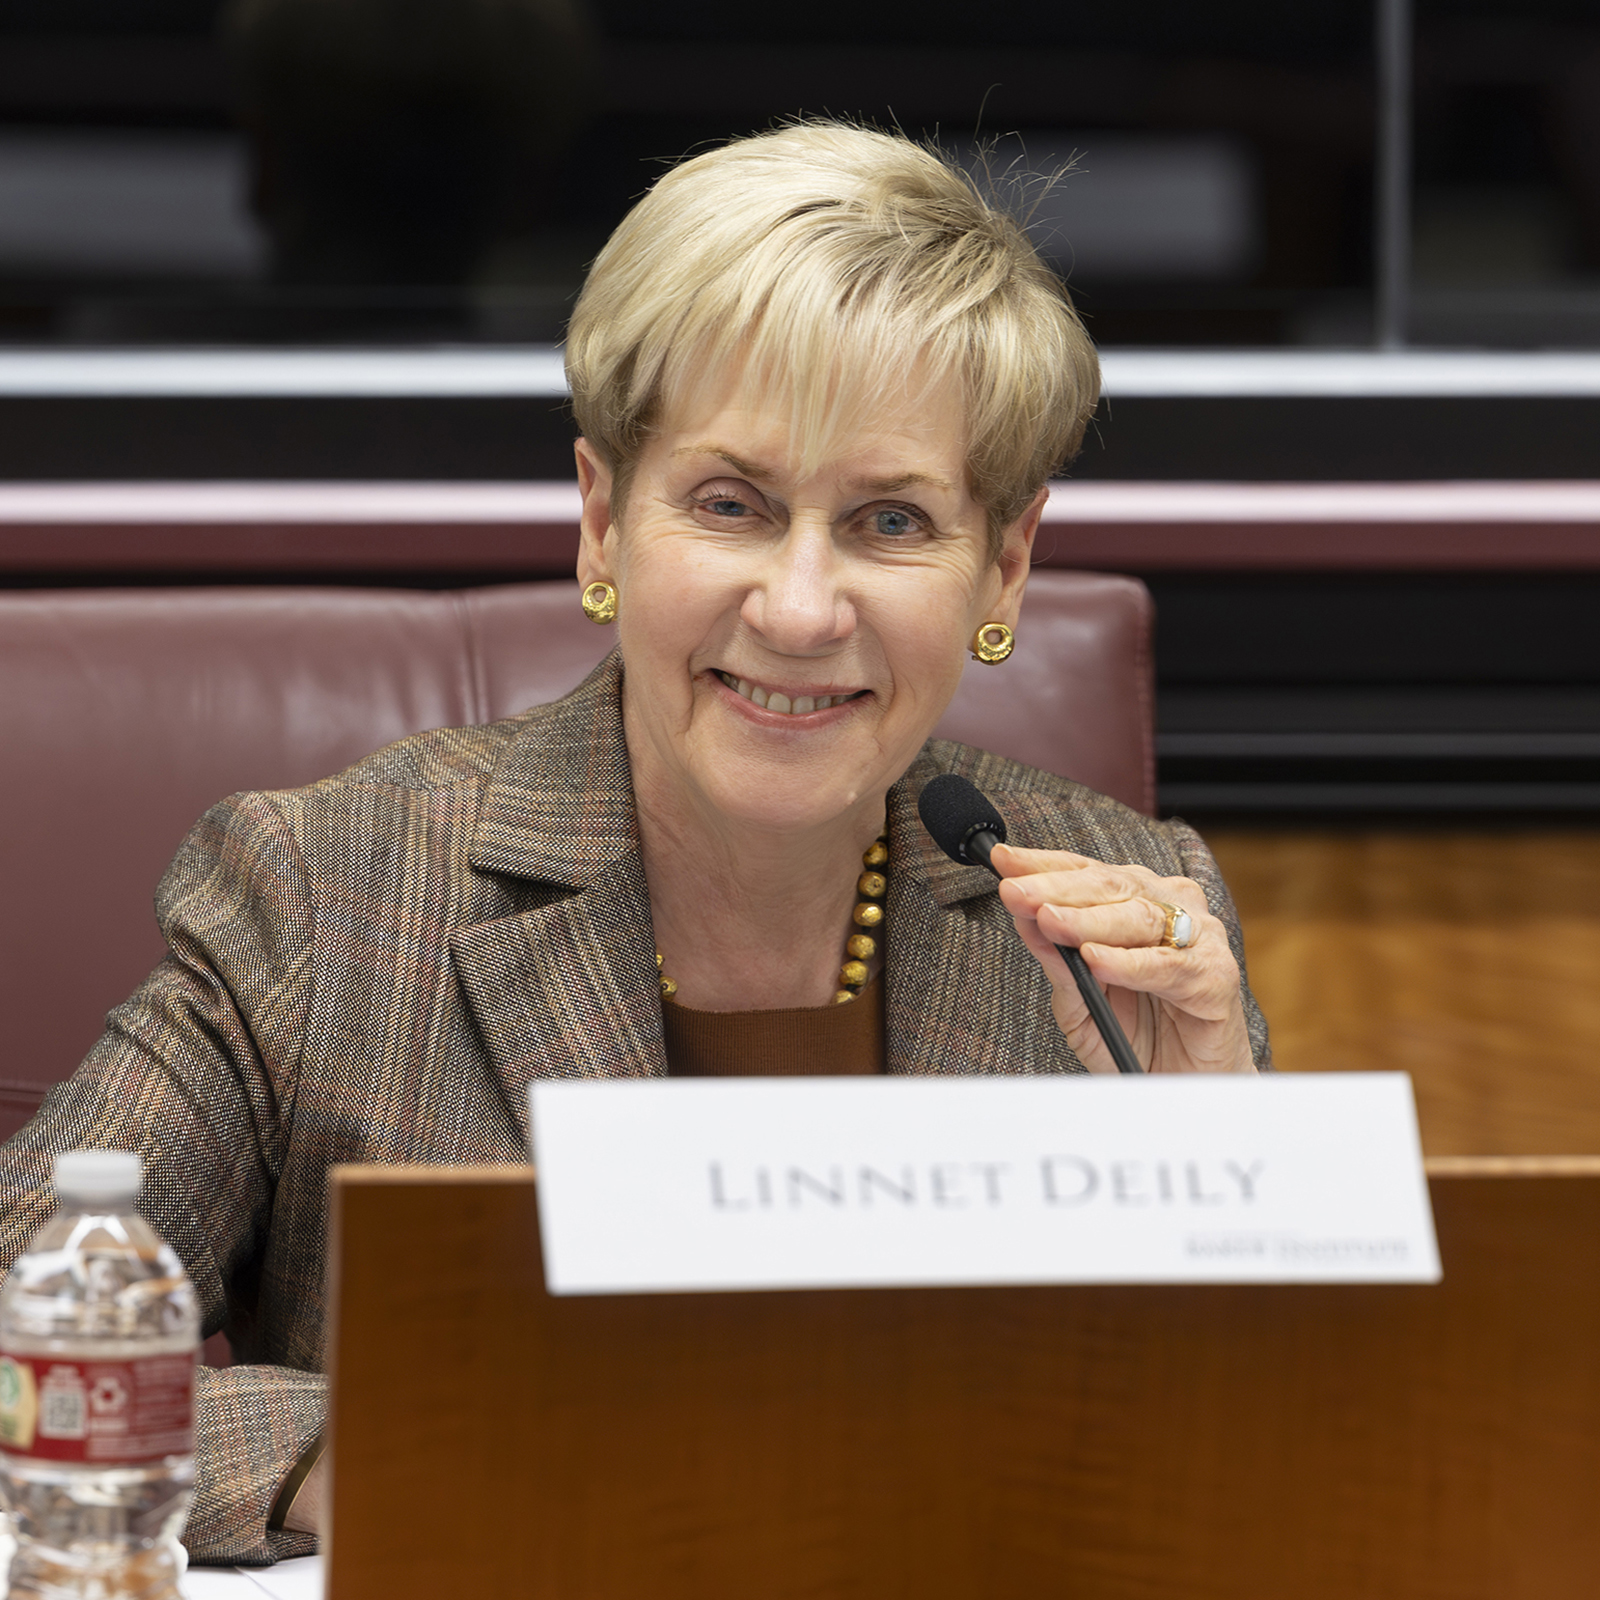 Chair Linnet Deily at a Meeting of the Board of Advisors